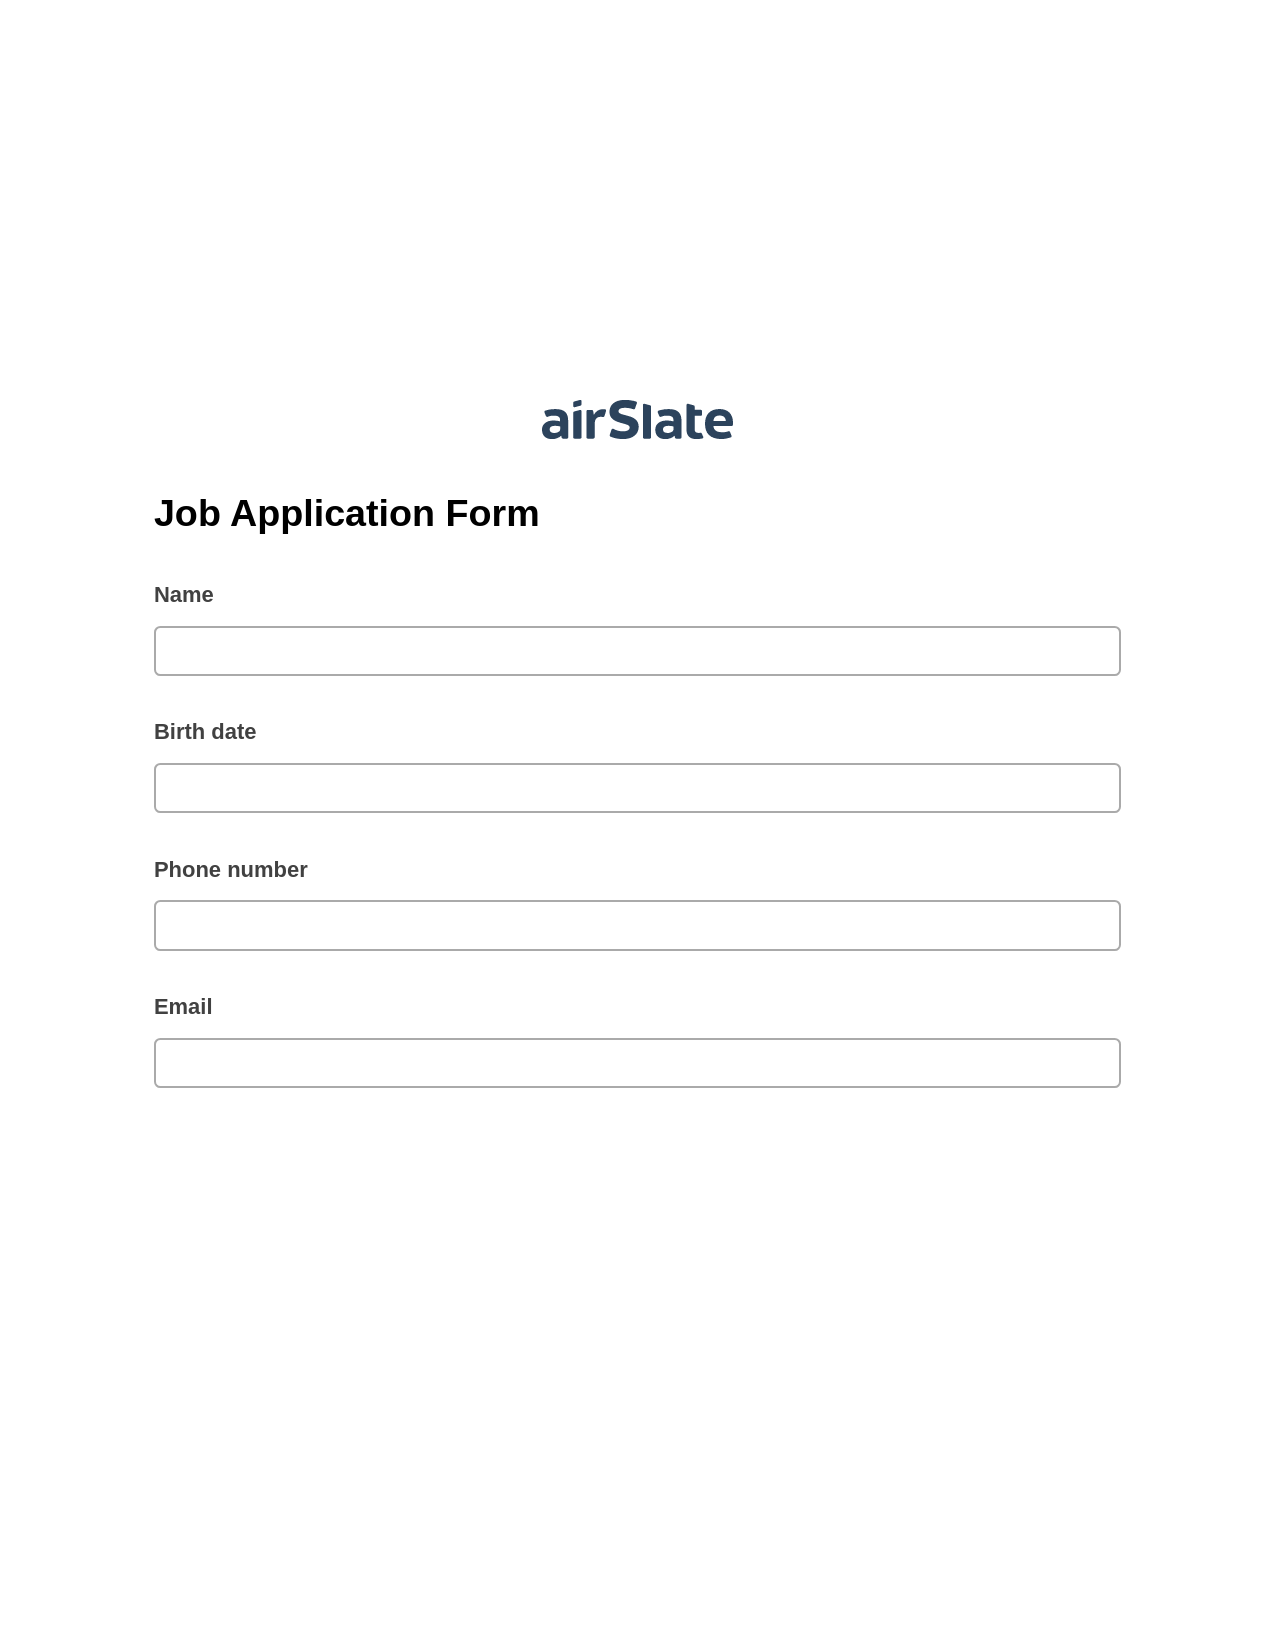 Job Application Form Pre-fill from NetSuite Records Bot, Update NetSuite Records Bot, Export to Google Sheet Bot